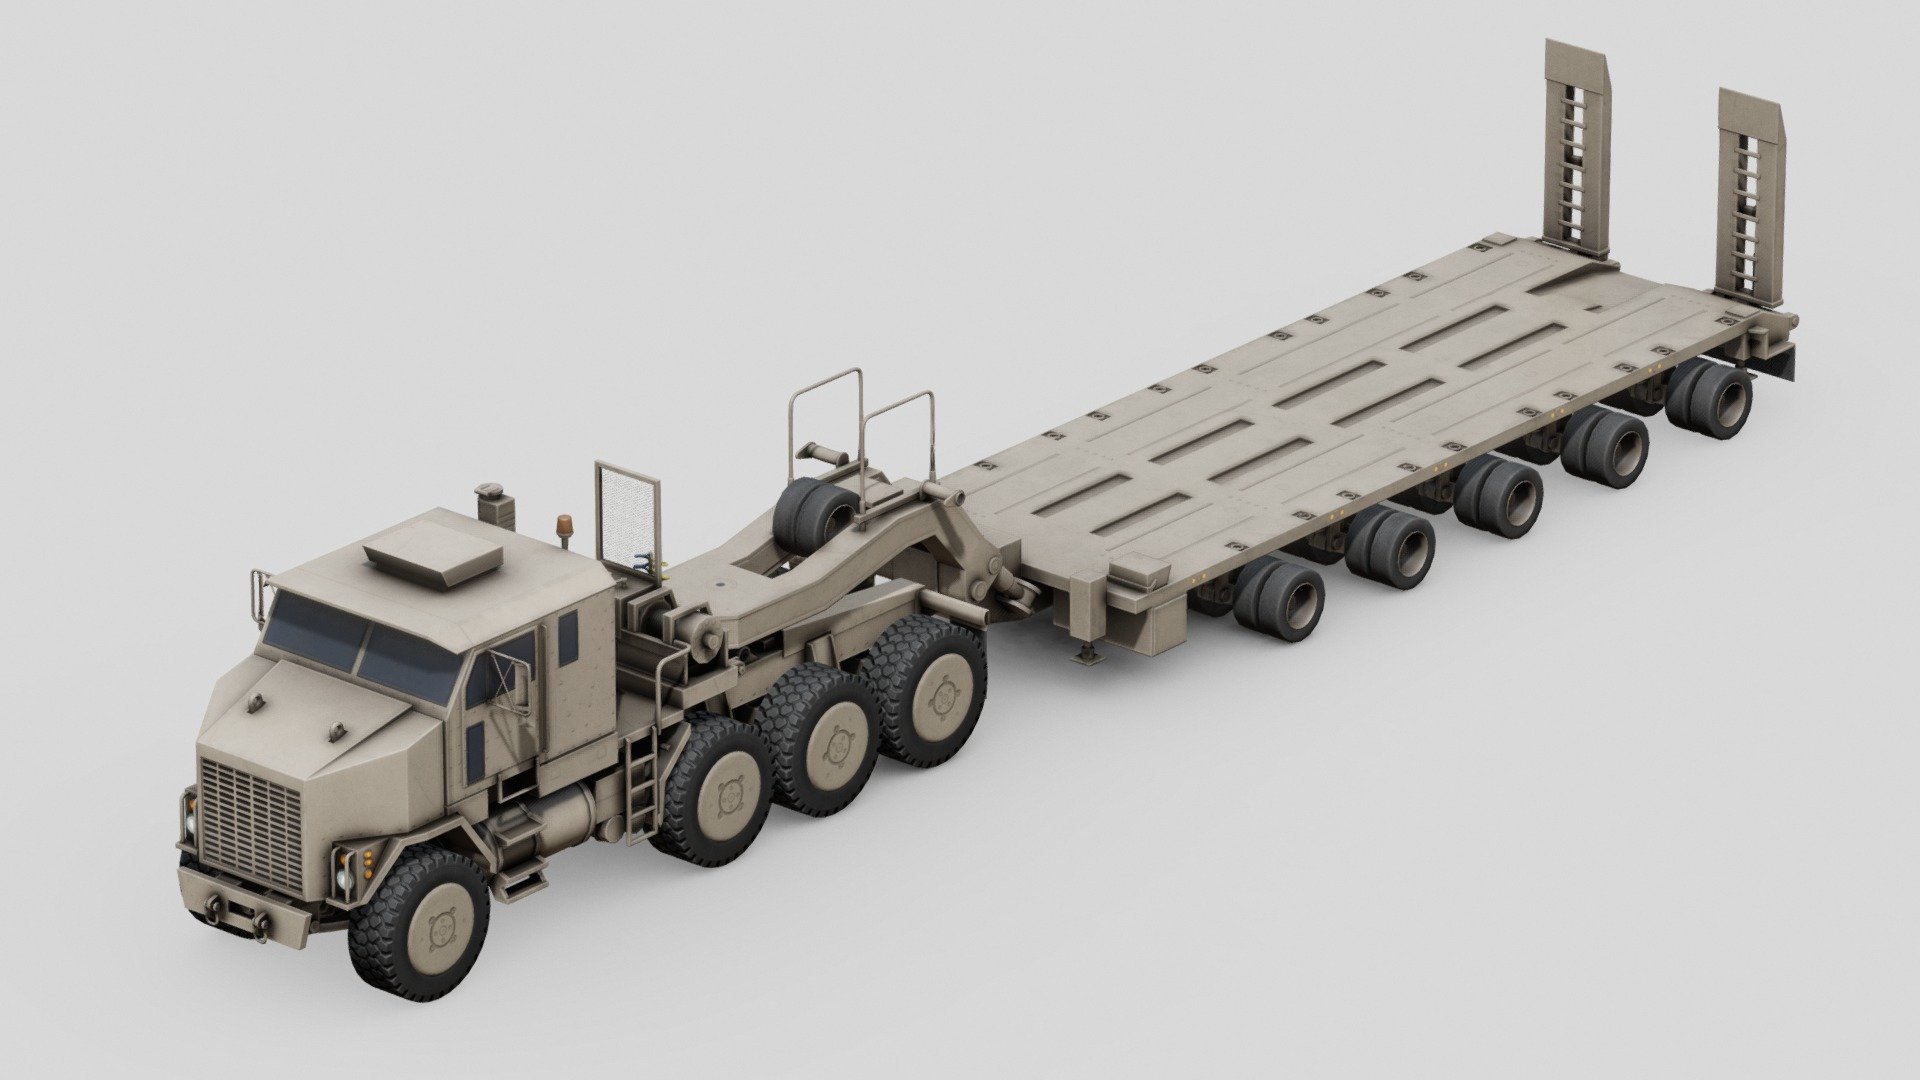 Check out this collection for more: US army vehicle models

M1070 is a U.S. Army tank transporter tractor unit. The primary purpose of this combination for the U.S. Army is the transport of the M1 Abrams tank.

The M1070 is coupled to a M1000 semi-trailer. The M1300 is a U.S. Army Europe-specific derivative designed to be road legal within Europe and operates with a different trailer. They replaced the earlier M911 tractor unit and M747 semi-trailer.

4K PBR textures. Separate materials for the truck cabin, frame, trailer and wheel.

Includes NATO 3 color textures 3d model